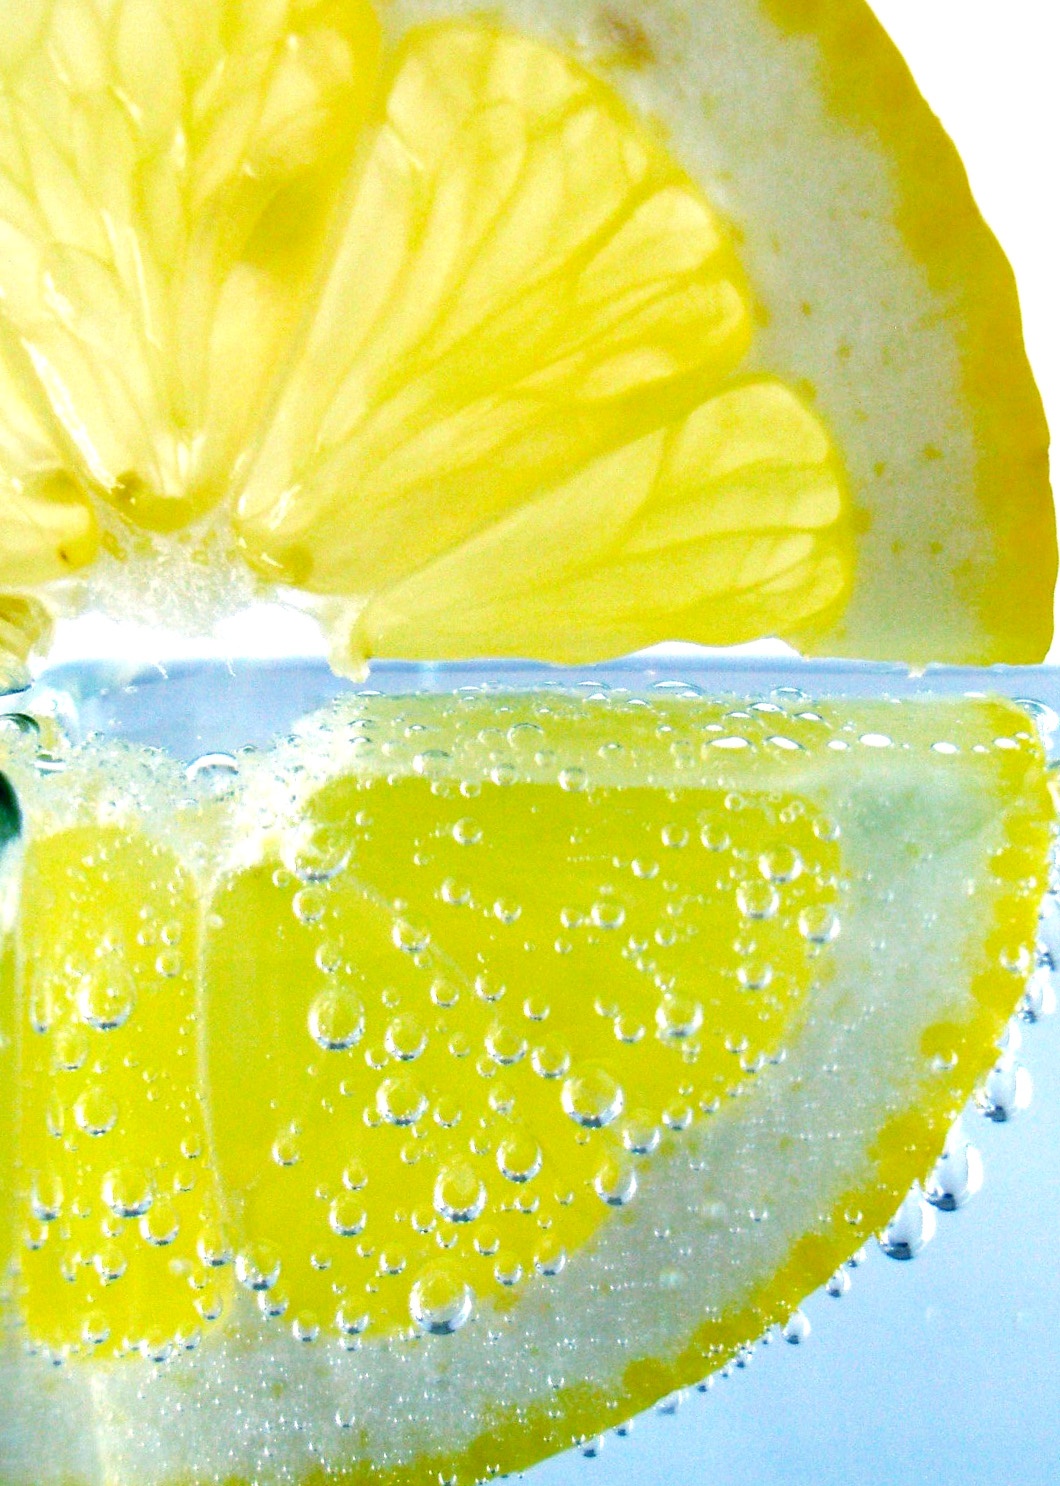 Could a Lemonade Stand Be Training for Future Exhibitors?